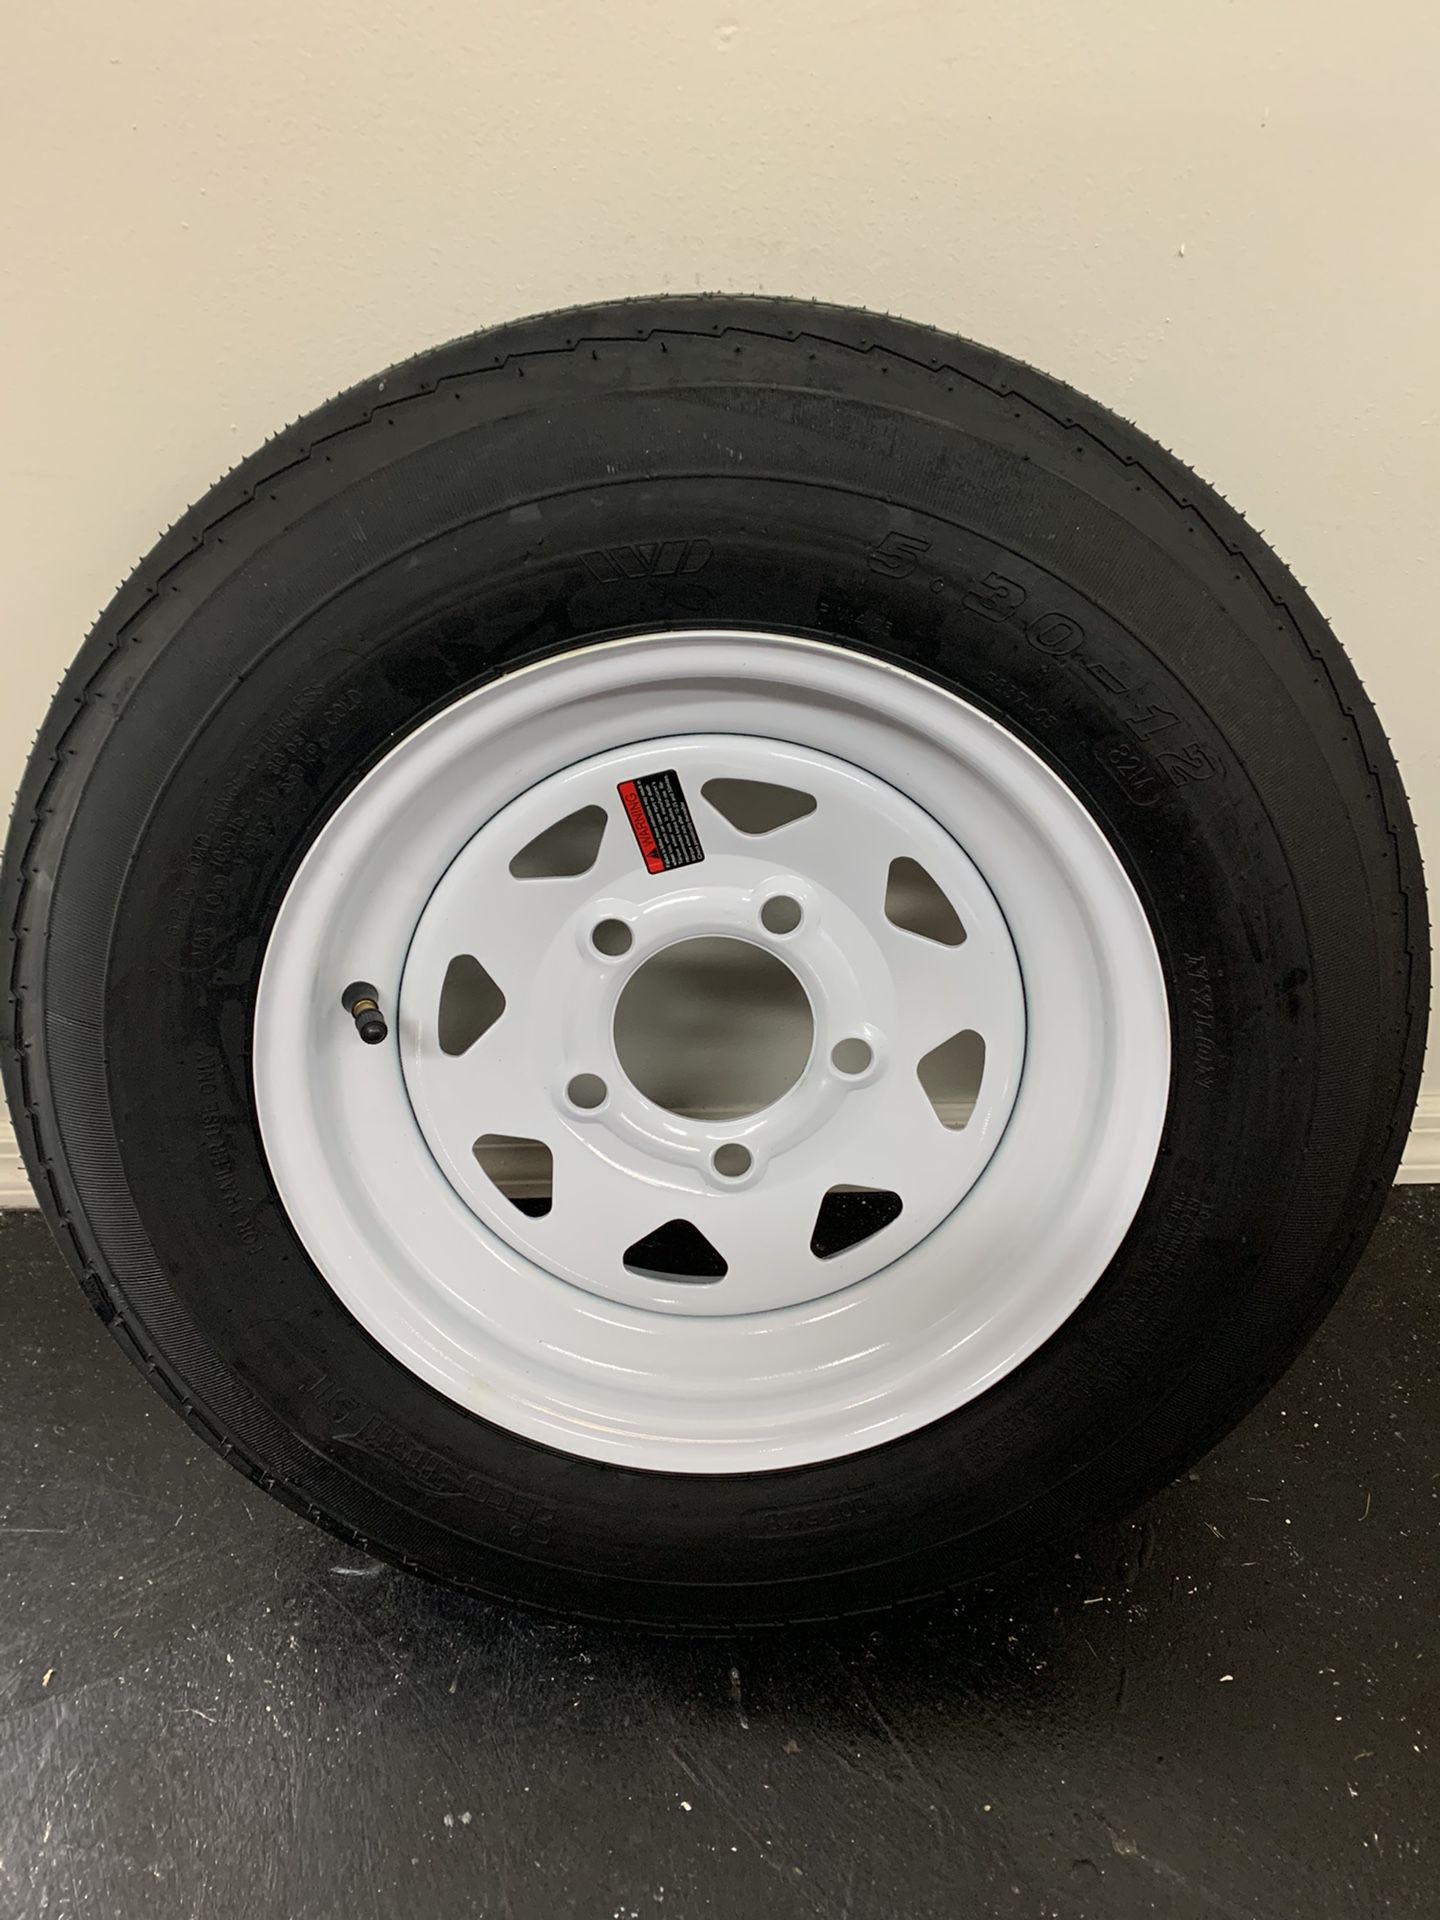 New st225/75r15 on a new rim. $100